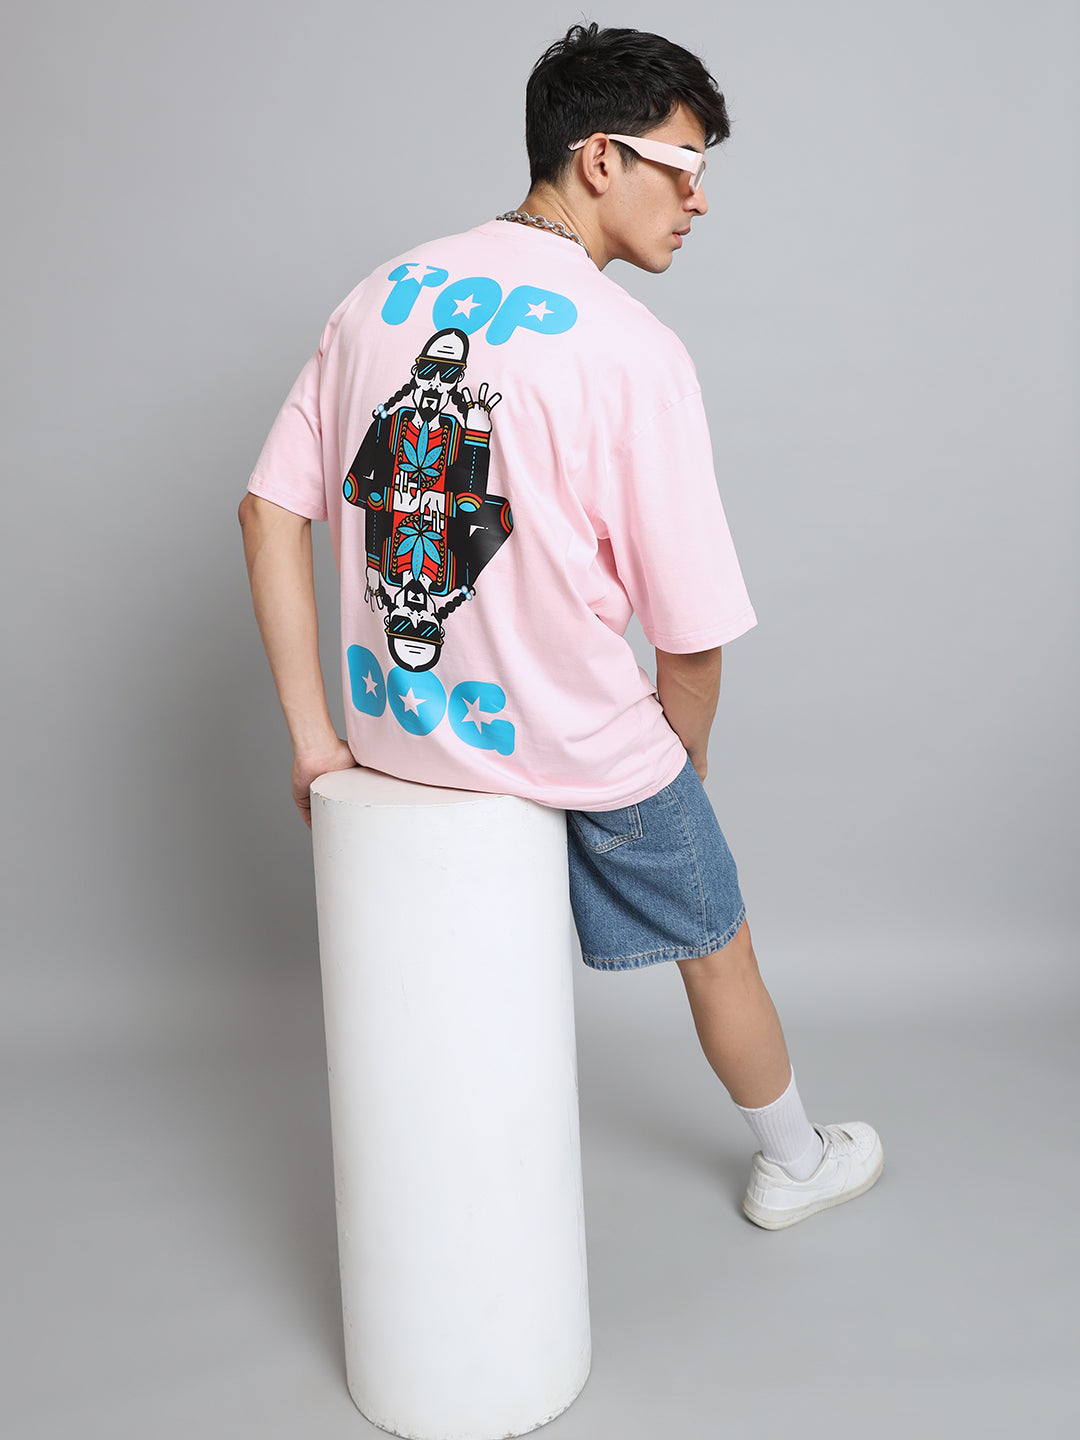 Top-Dog Over-Sized T-Shirt (Pink) - Wearduds